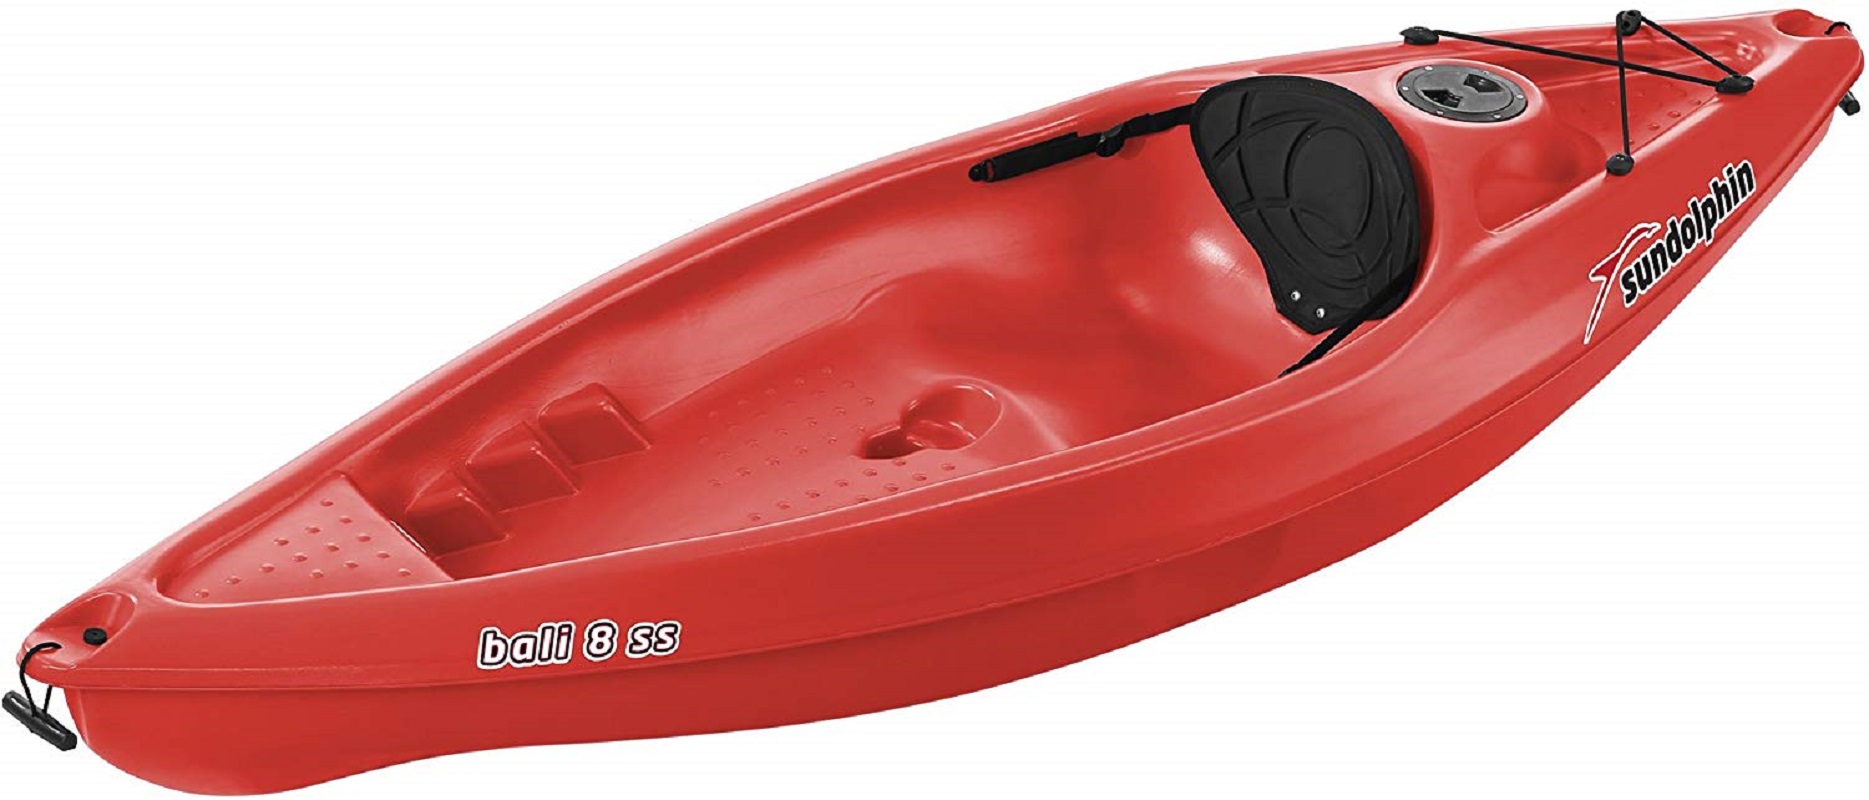 Shop Now For The Sun Dolphin Bali Ss 8 Foot Sit On Kayak Accuweather Shop